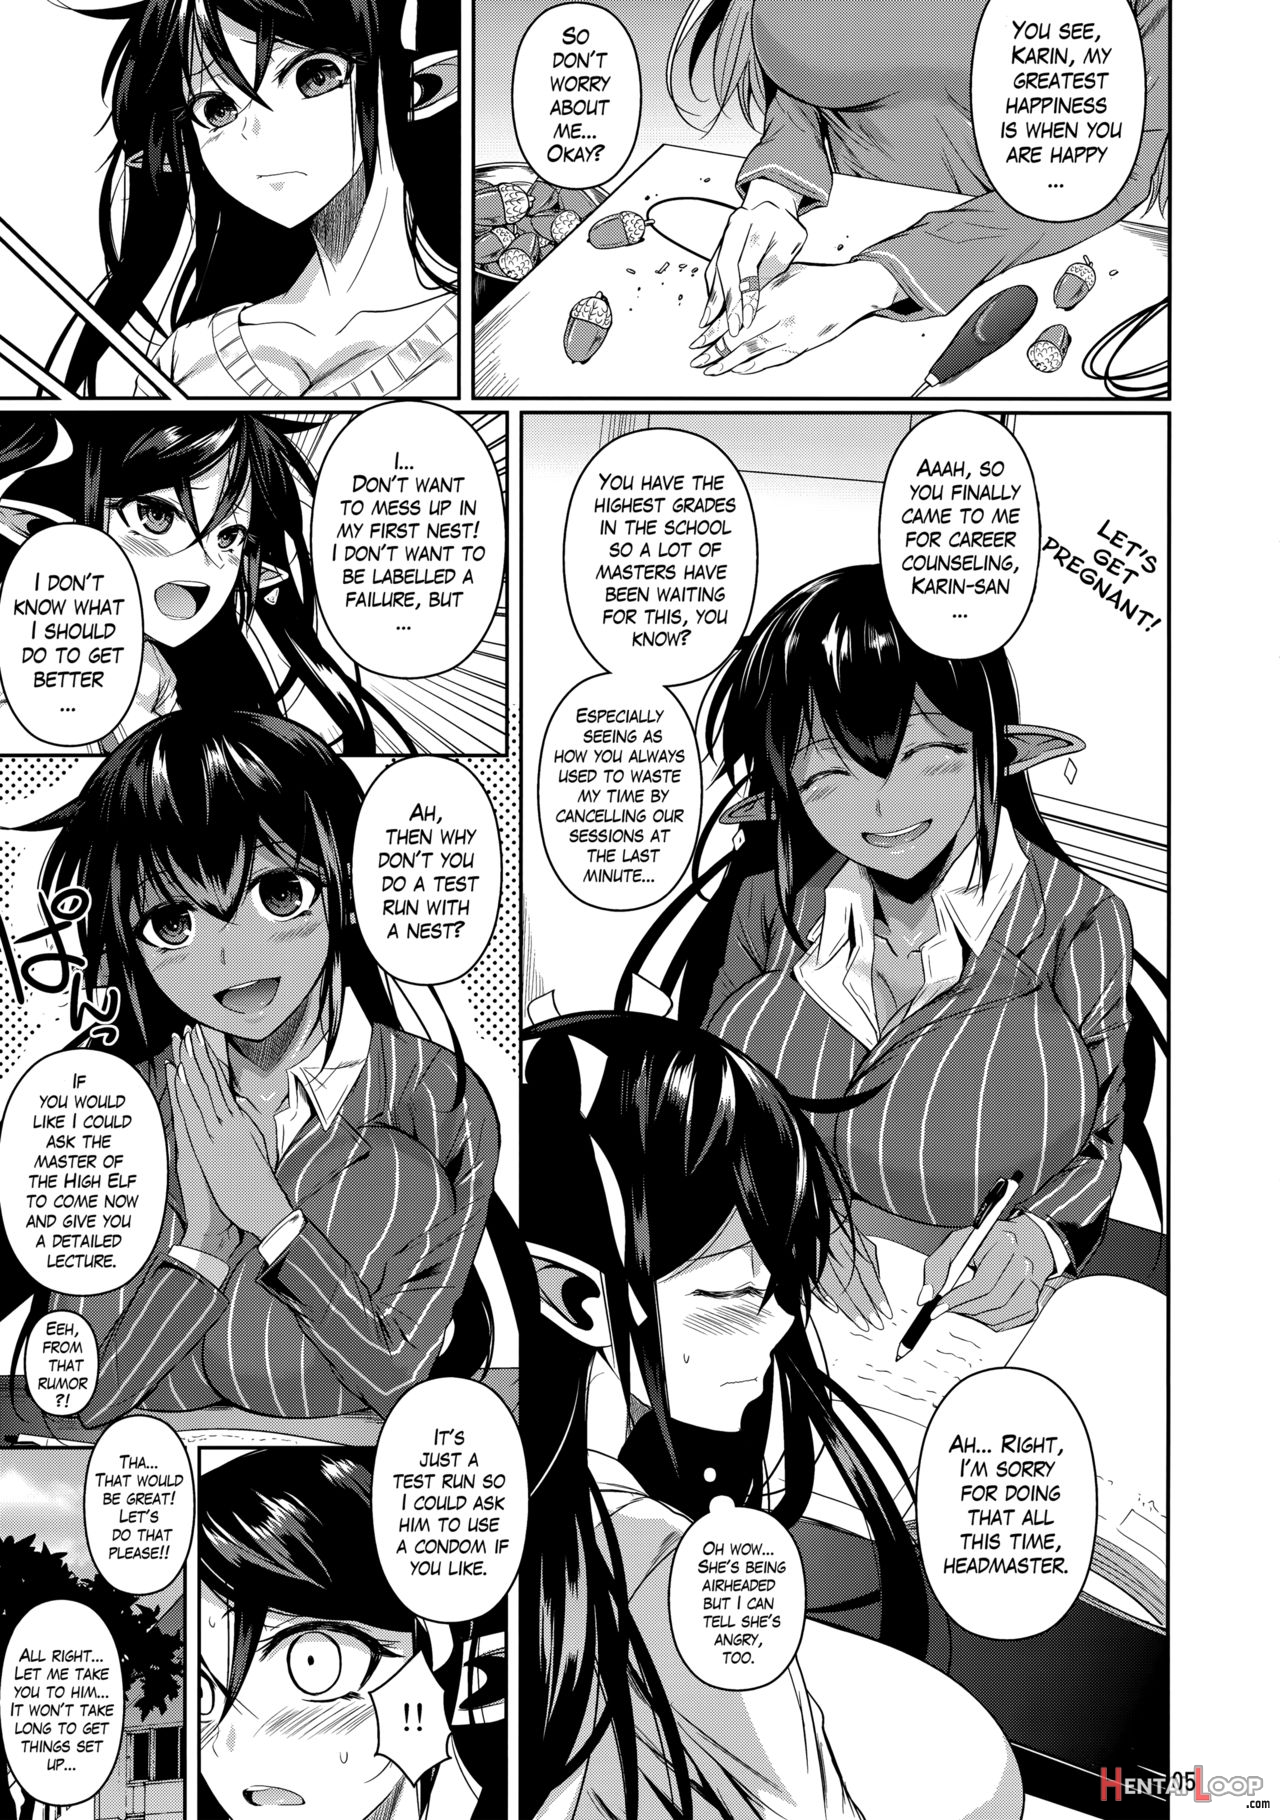 High Elf × High School Twintail – Decensored page 4